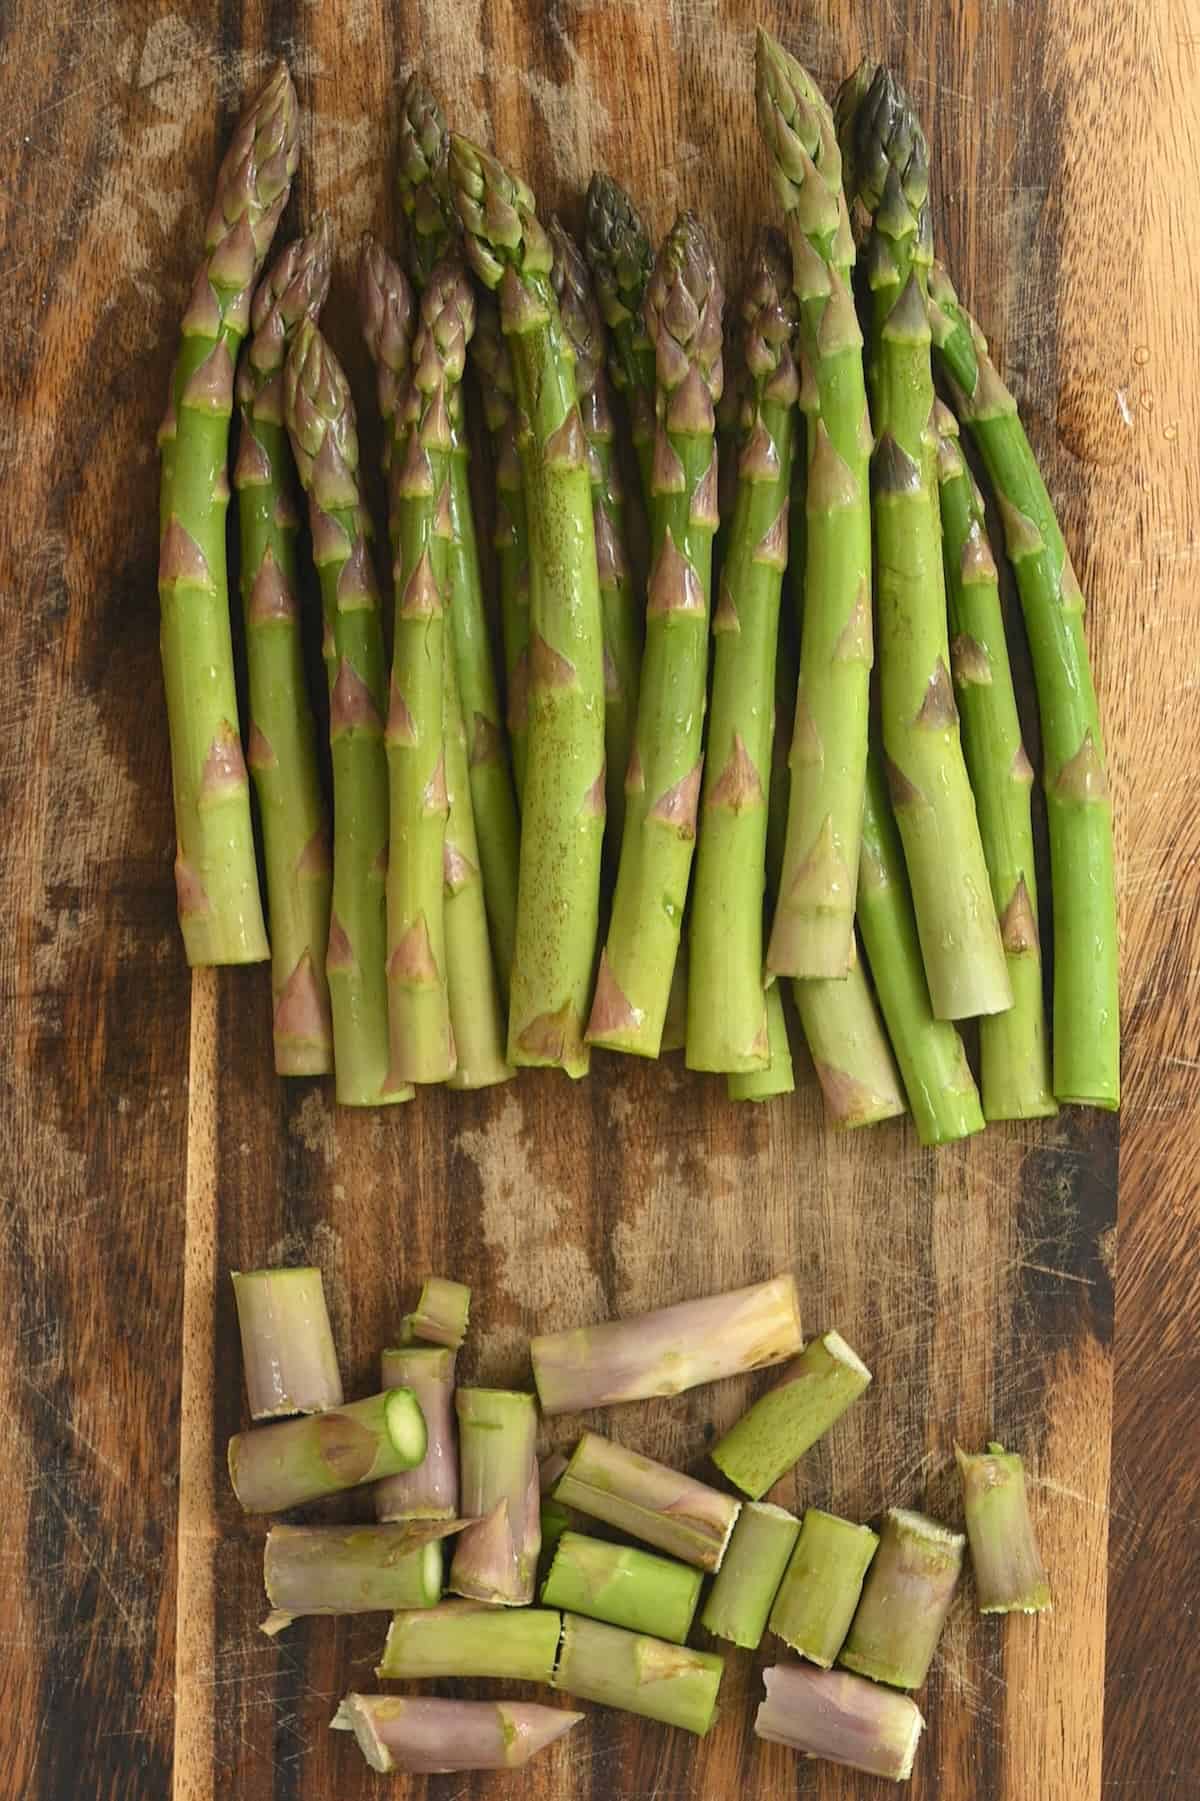 Trimming the ends of asparagus